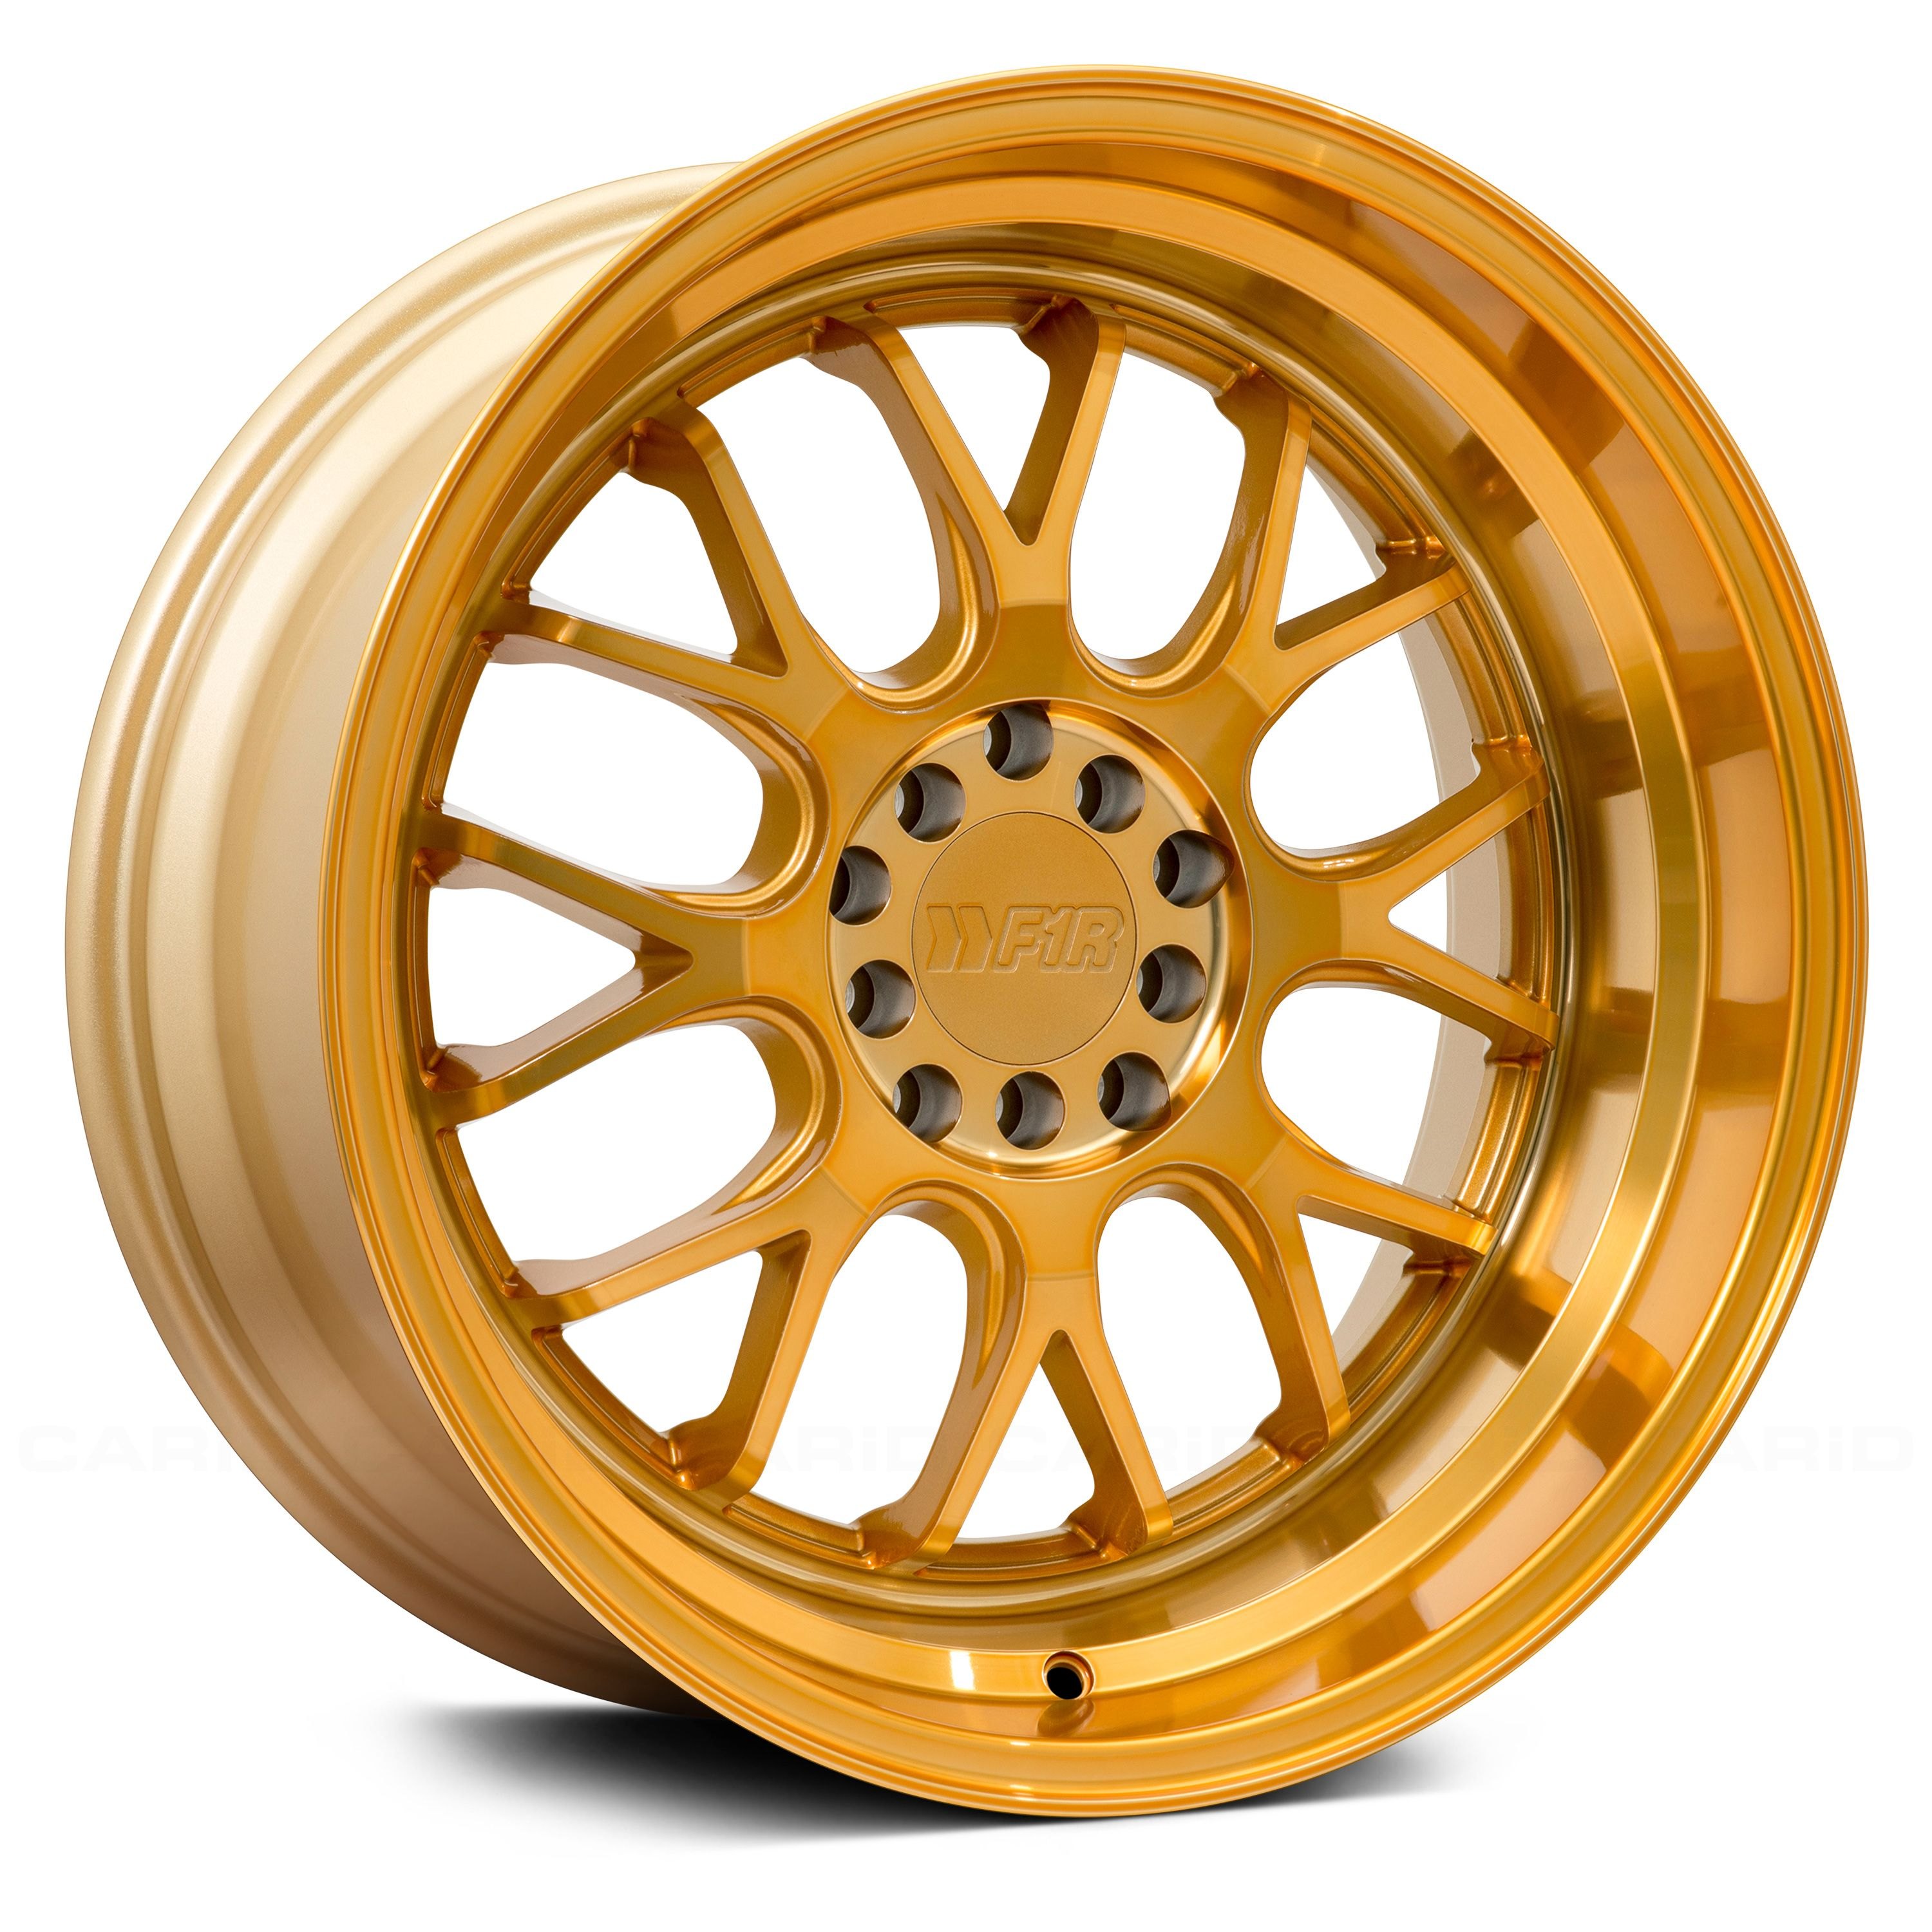 18 x 8.5 inches /5 x 114 mm, 38 mm Offset F1R F21 Gold Wheel with Machined Finish